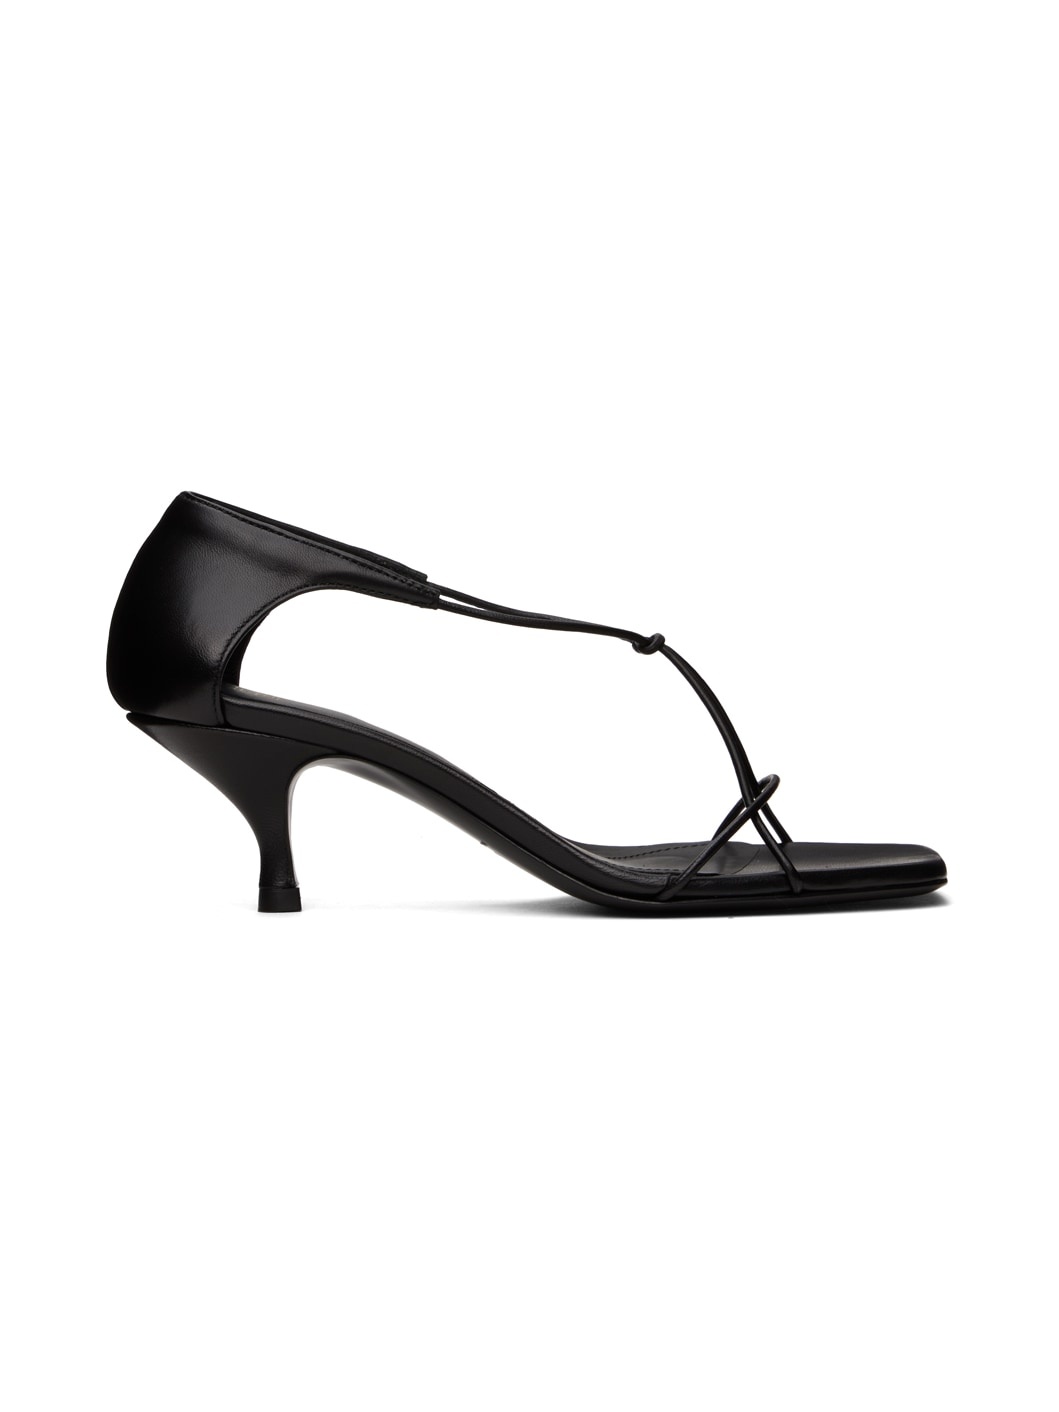 Black 'The Leather Knot' Heeled Sandals - 1